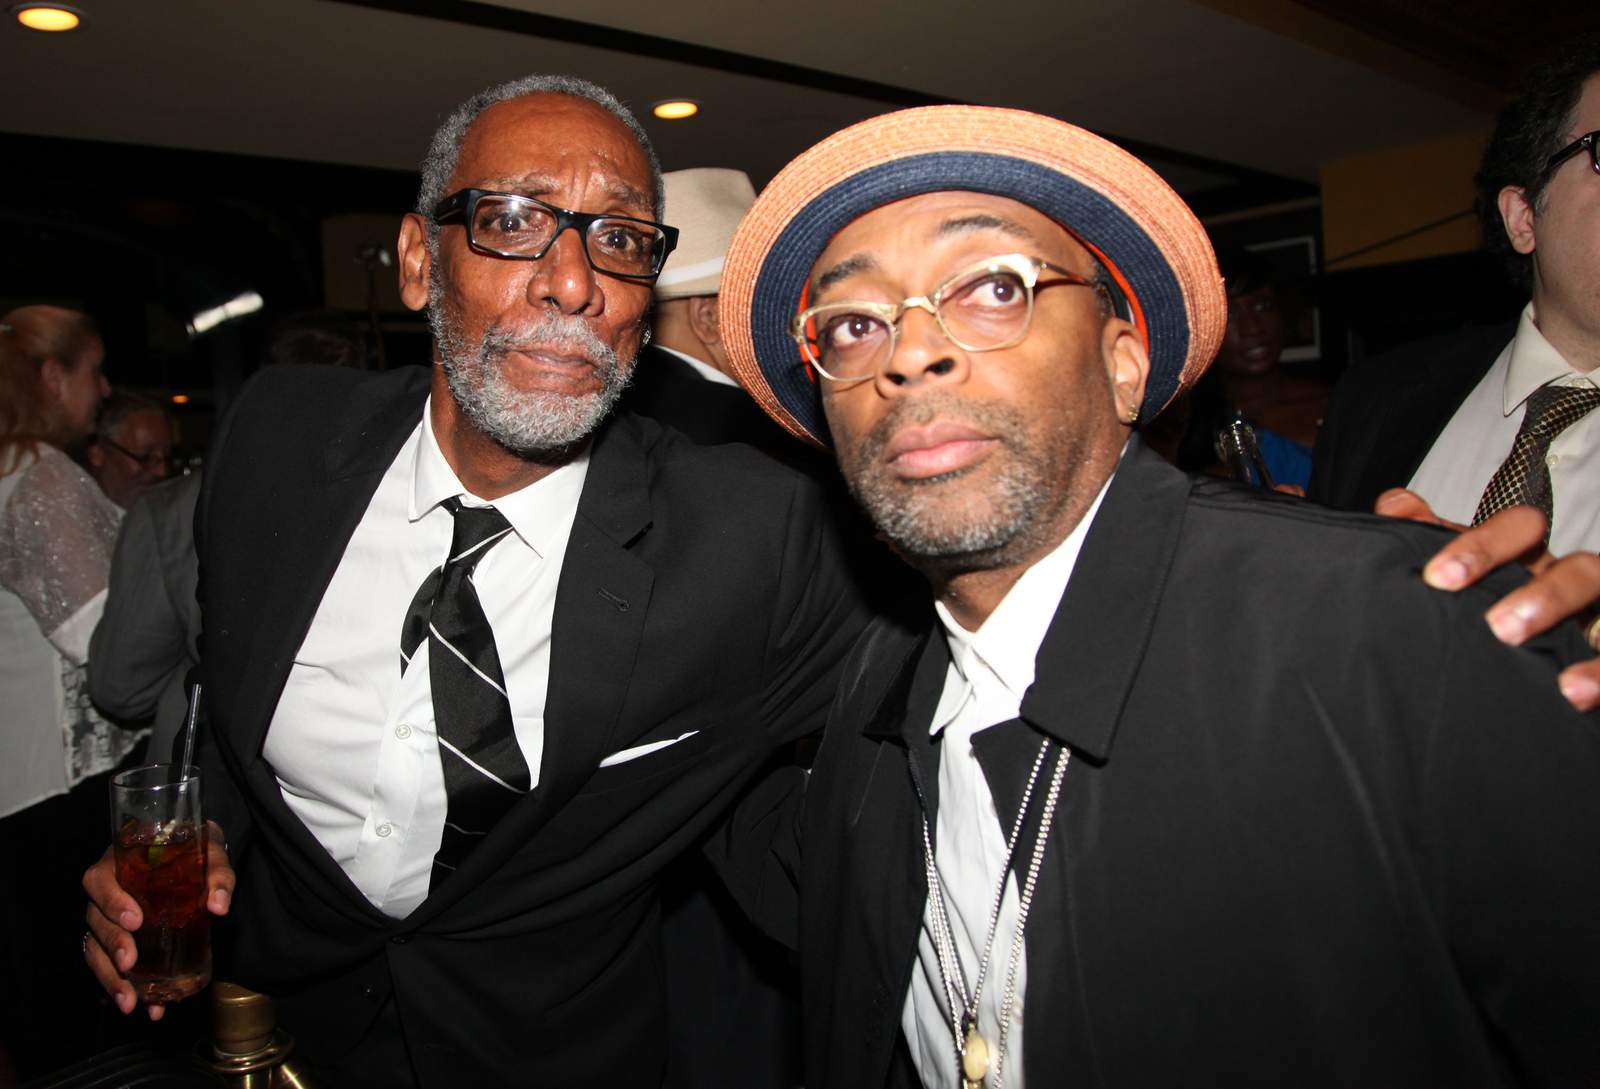 Thomas Jefferson Byrd, known for Spike Lee films, killed